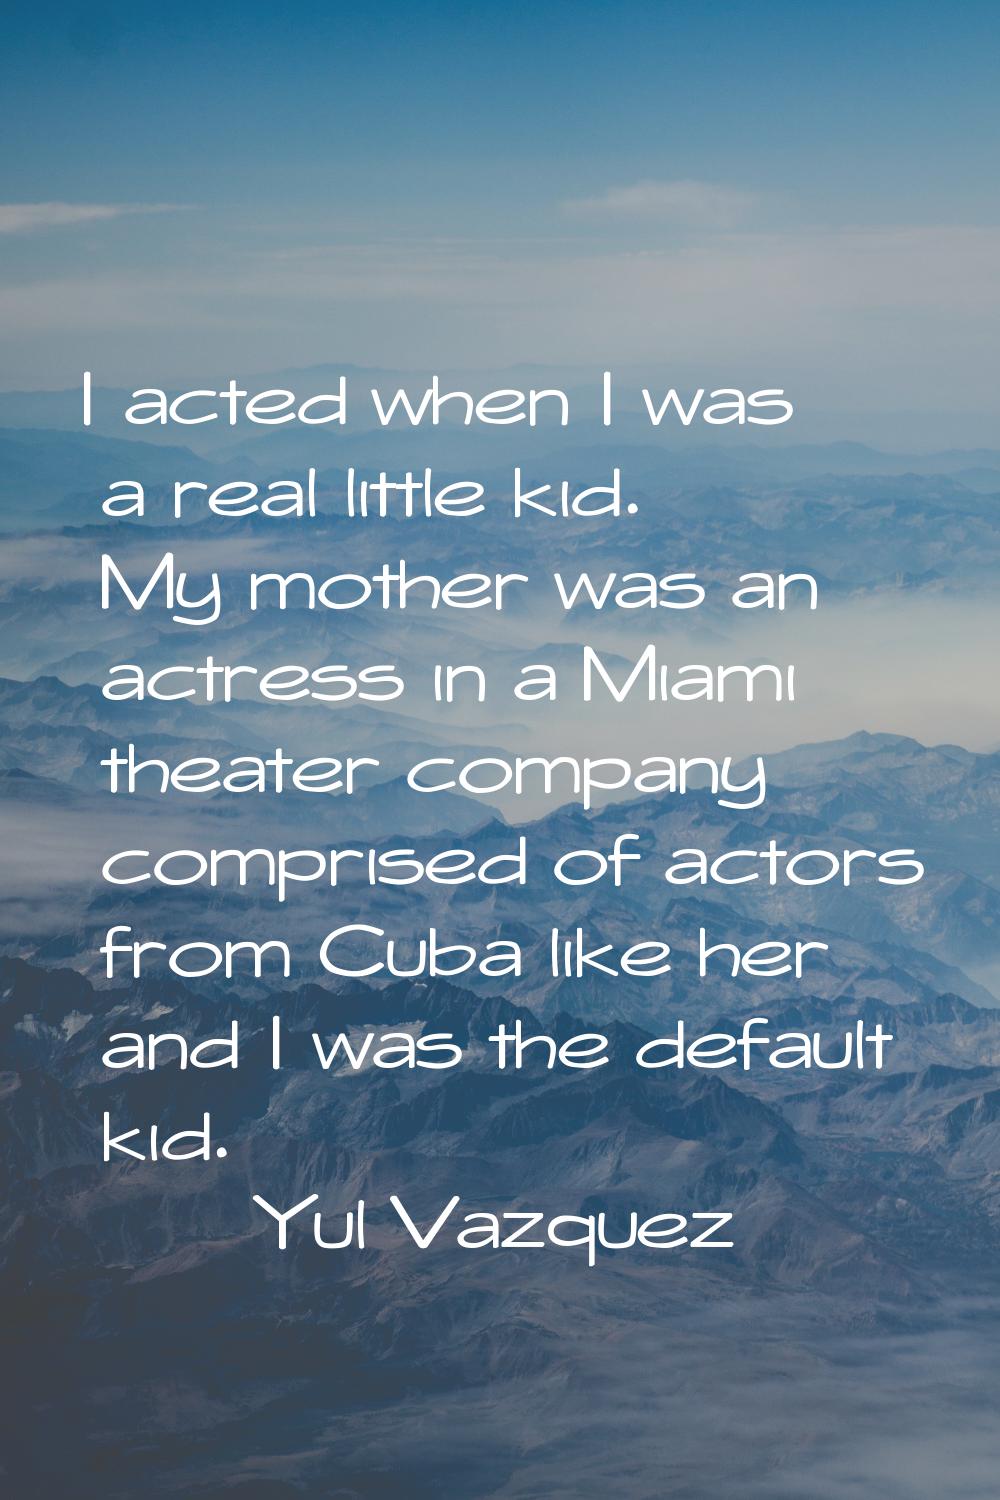 I acted when I was a real little kid. My mother was an actress in a Miami theater company comprised